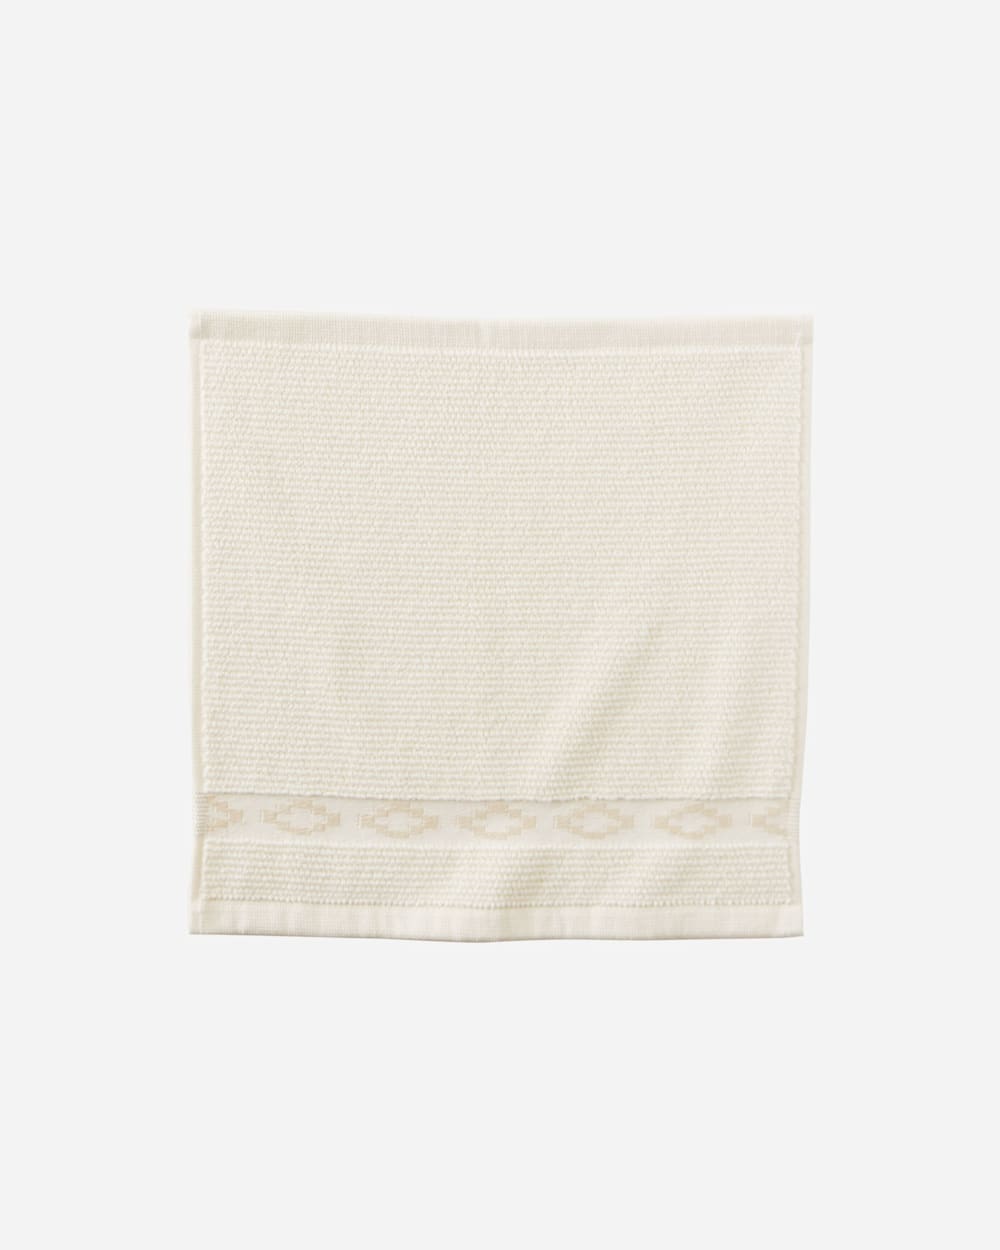 ALTERNATE VIEW OF GRAND TETON TOWEL SET IN ANTIQUE WHITE image number 3